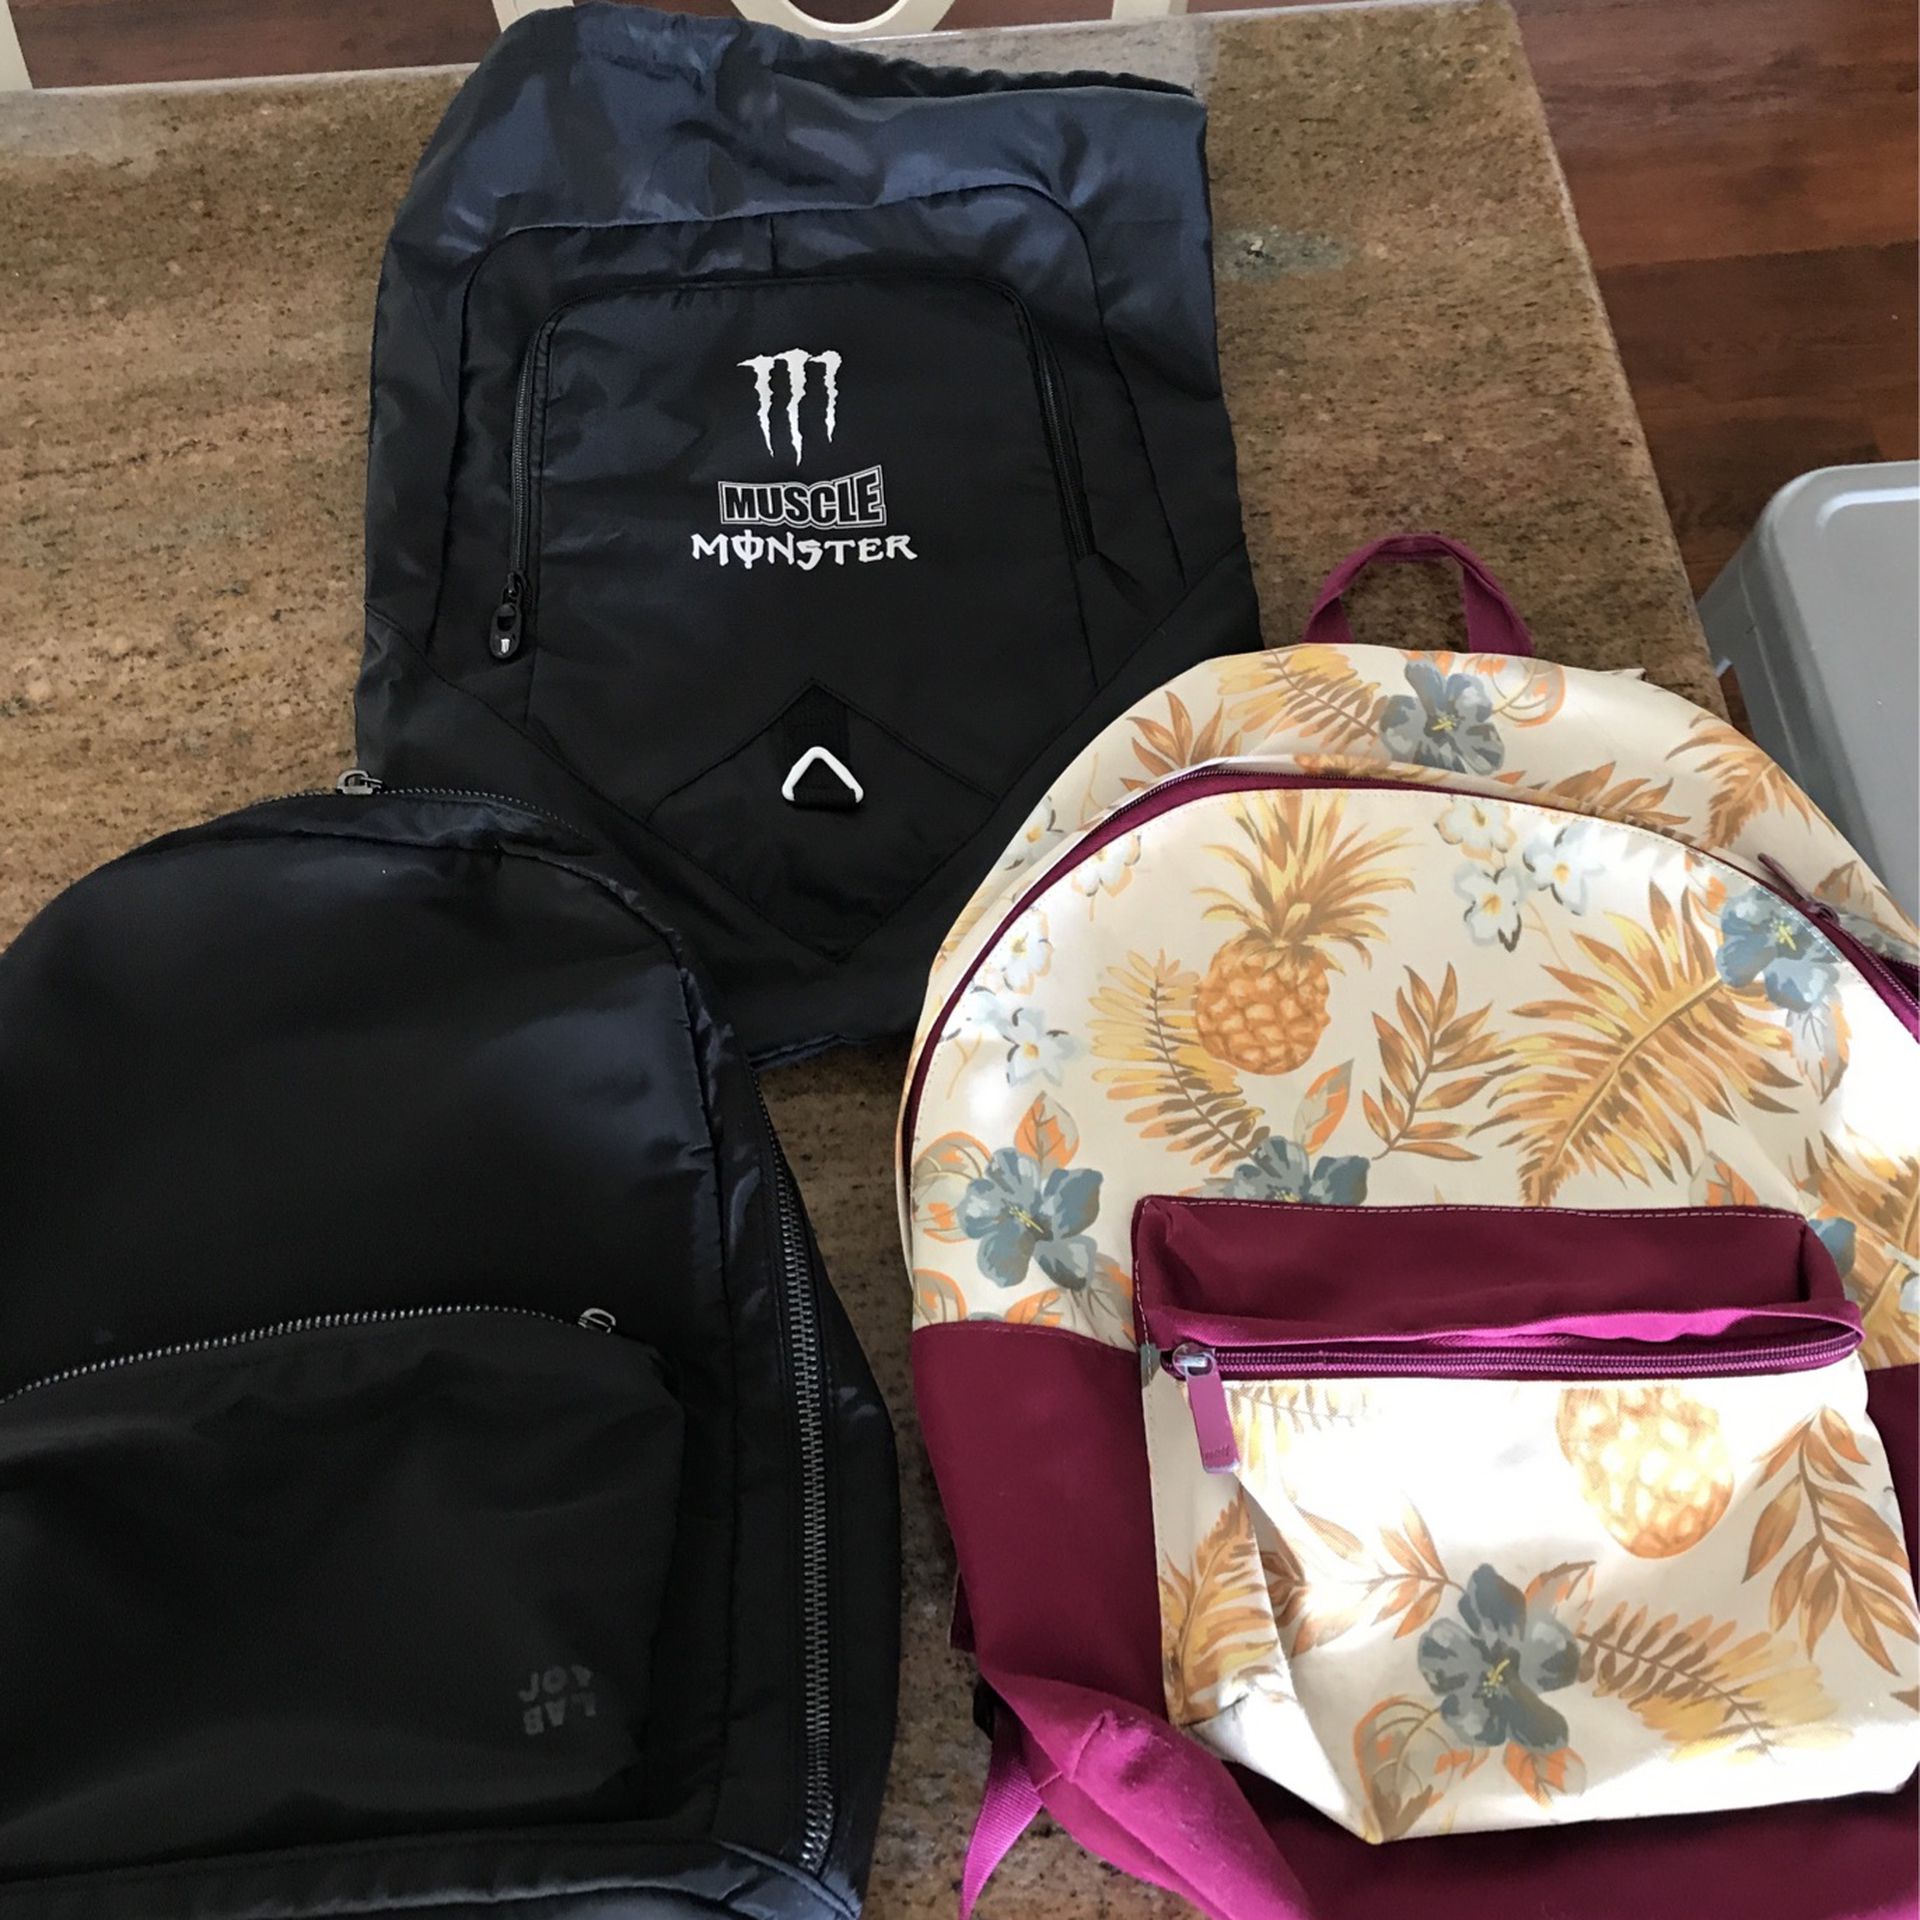 Excellent Backpacks (3) Like New Condition